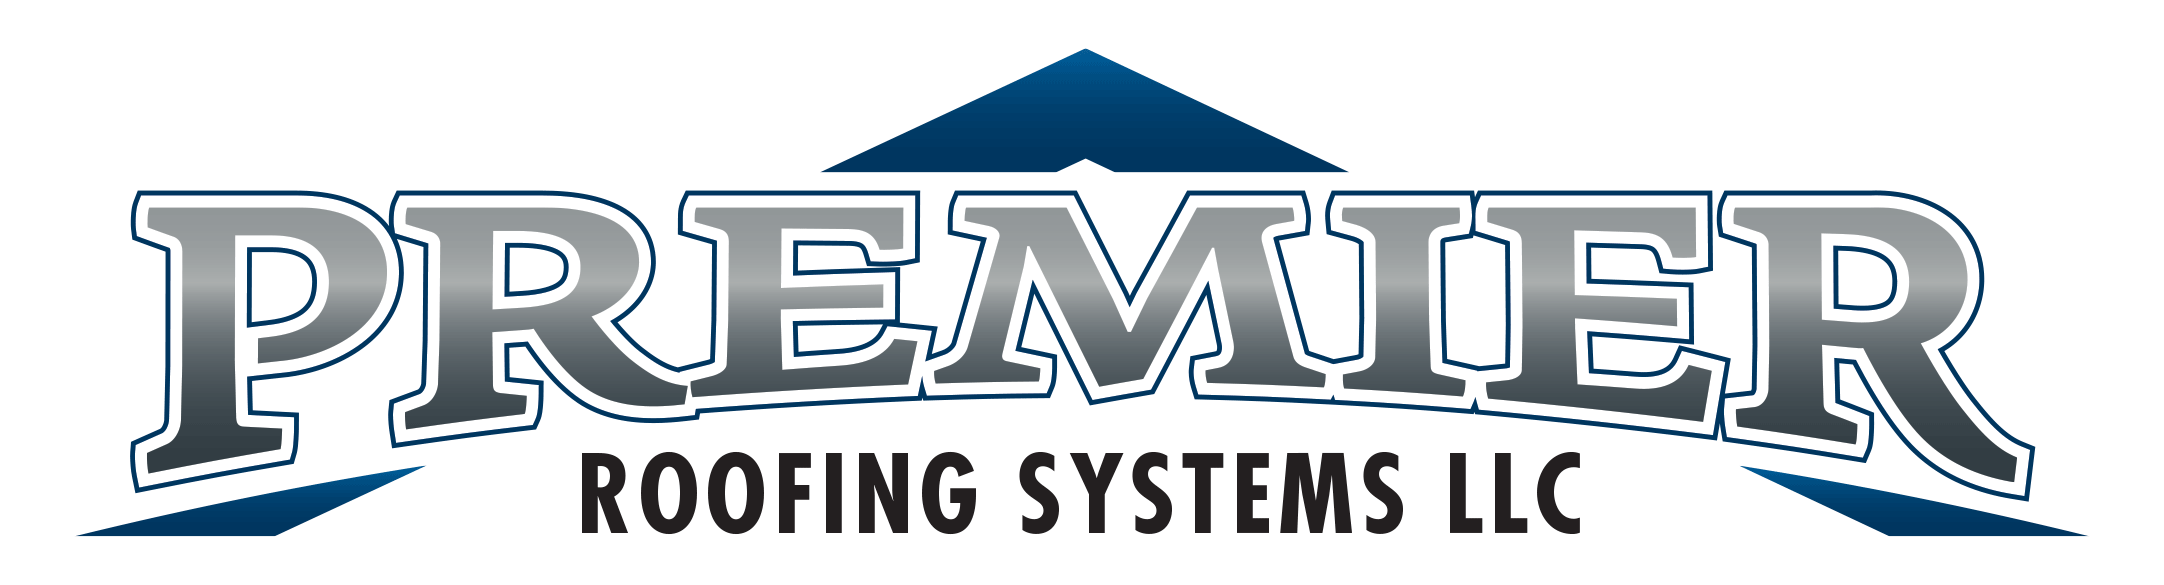 Premier Roofing Systems